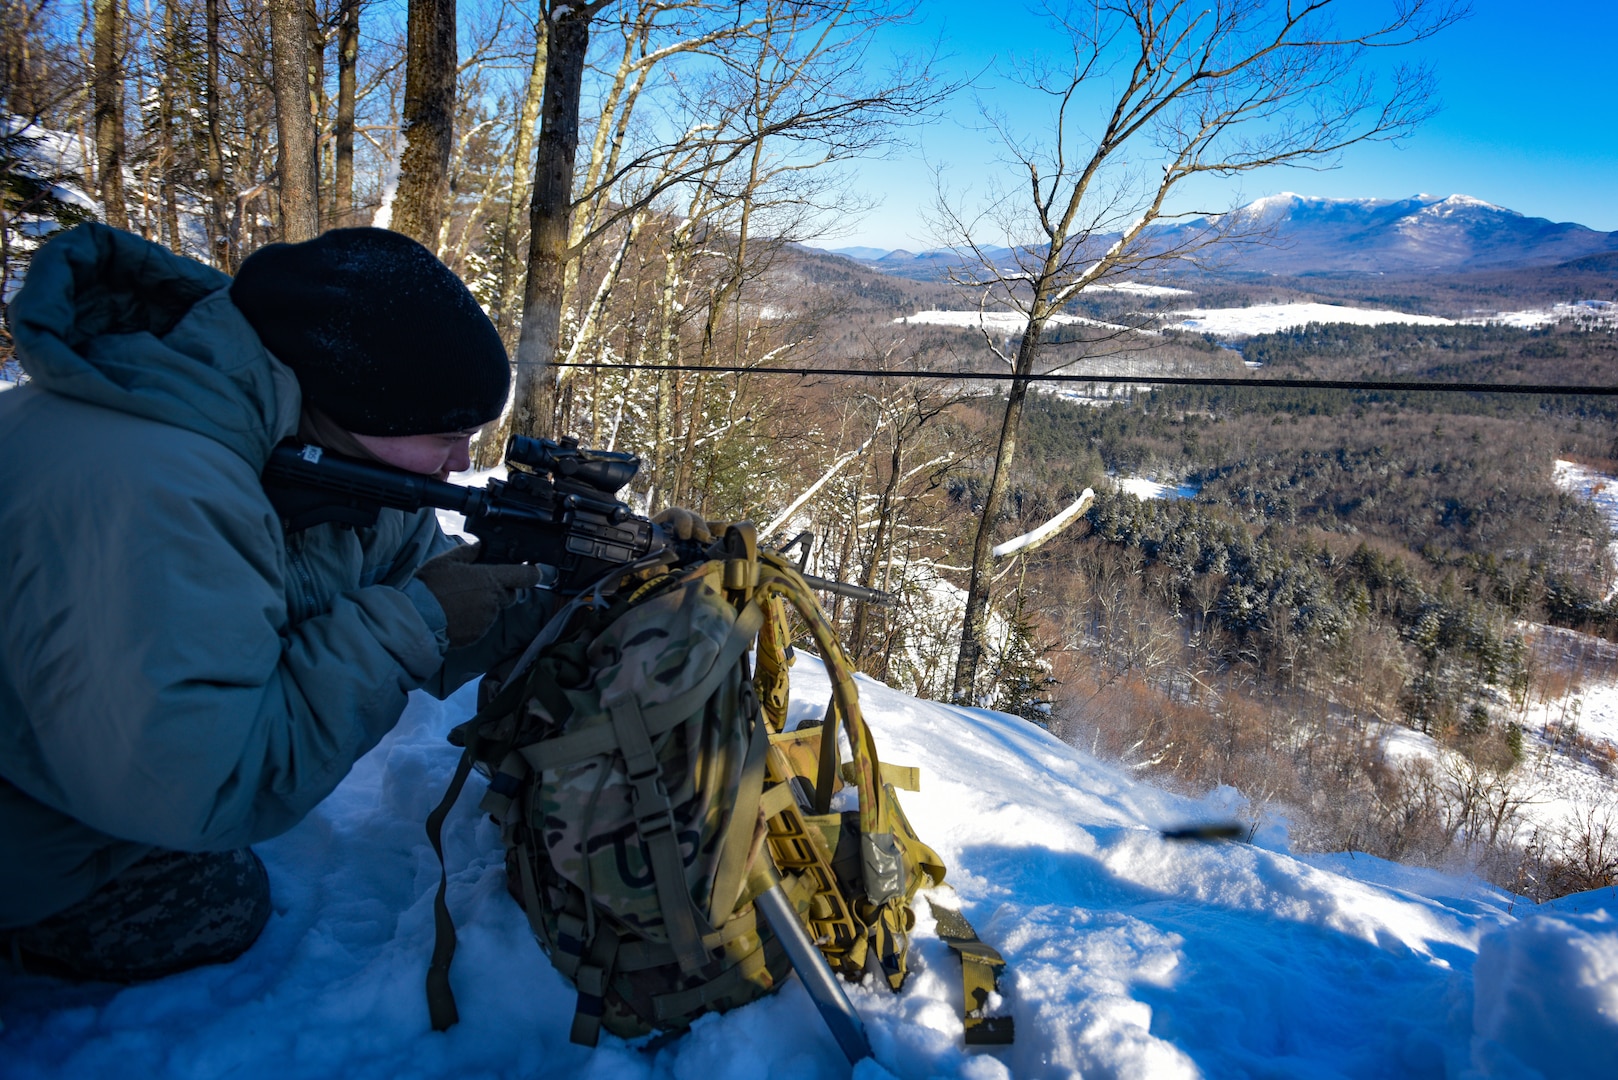 Cadet Elizabeth Carney, a student at the U.S. Army Mountain Warfare School’s Basic Military Mountaineer Course, shoots at a high-angle range Jan. 24, 2022. The school teaches basic, advanced and specialty mountain warfare courses to U.S. and foreign service members.